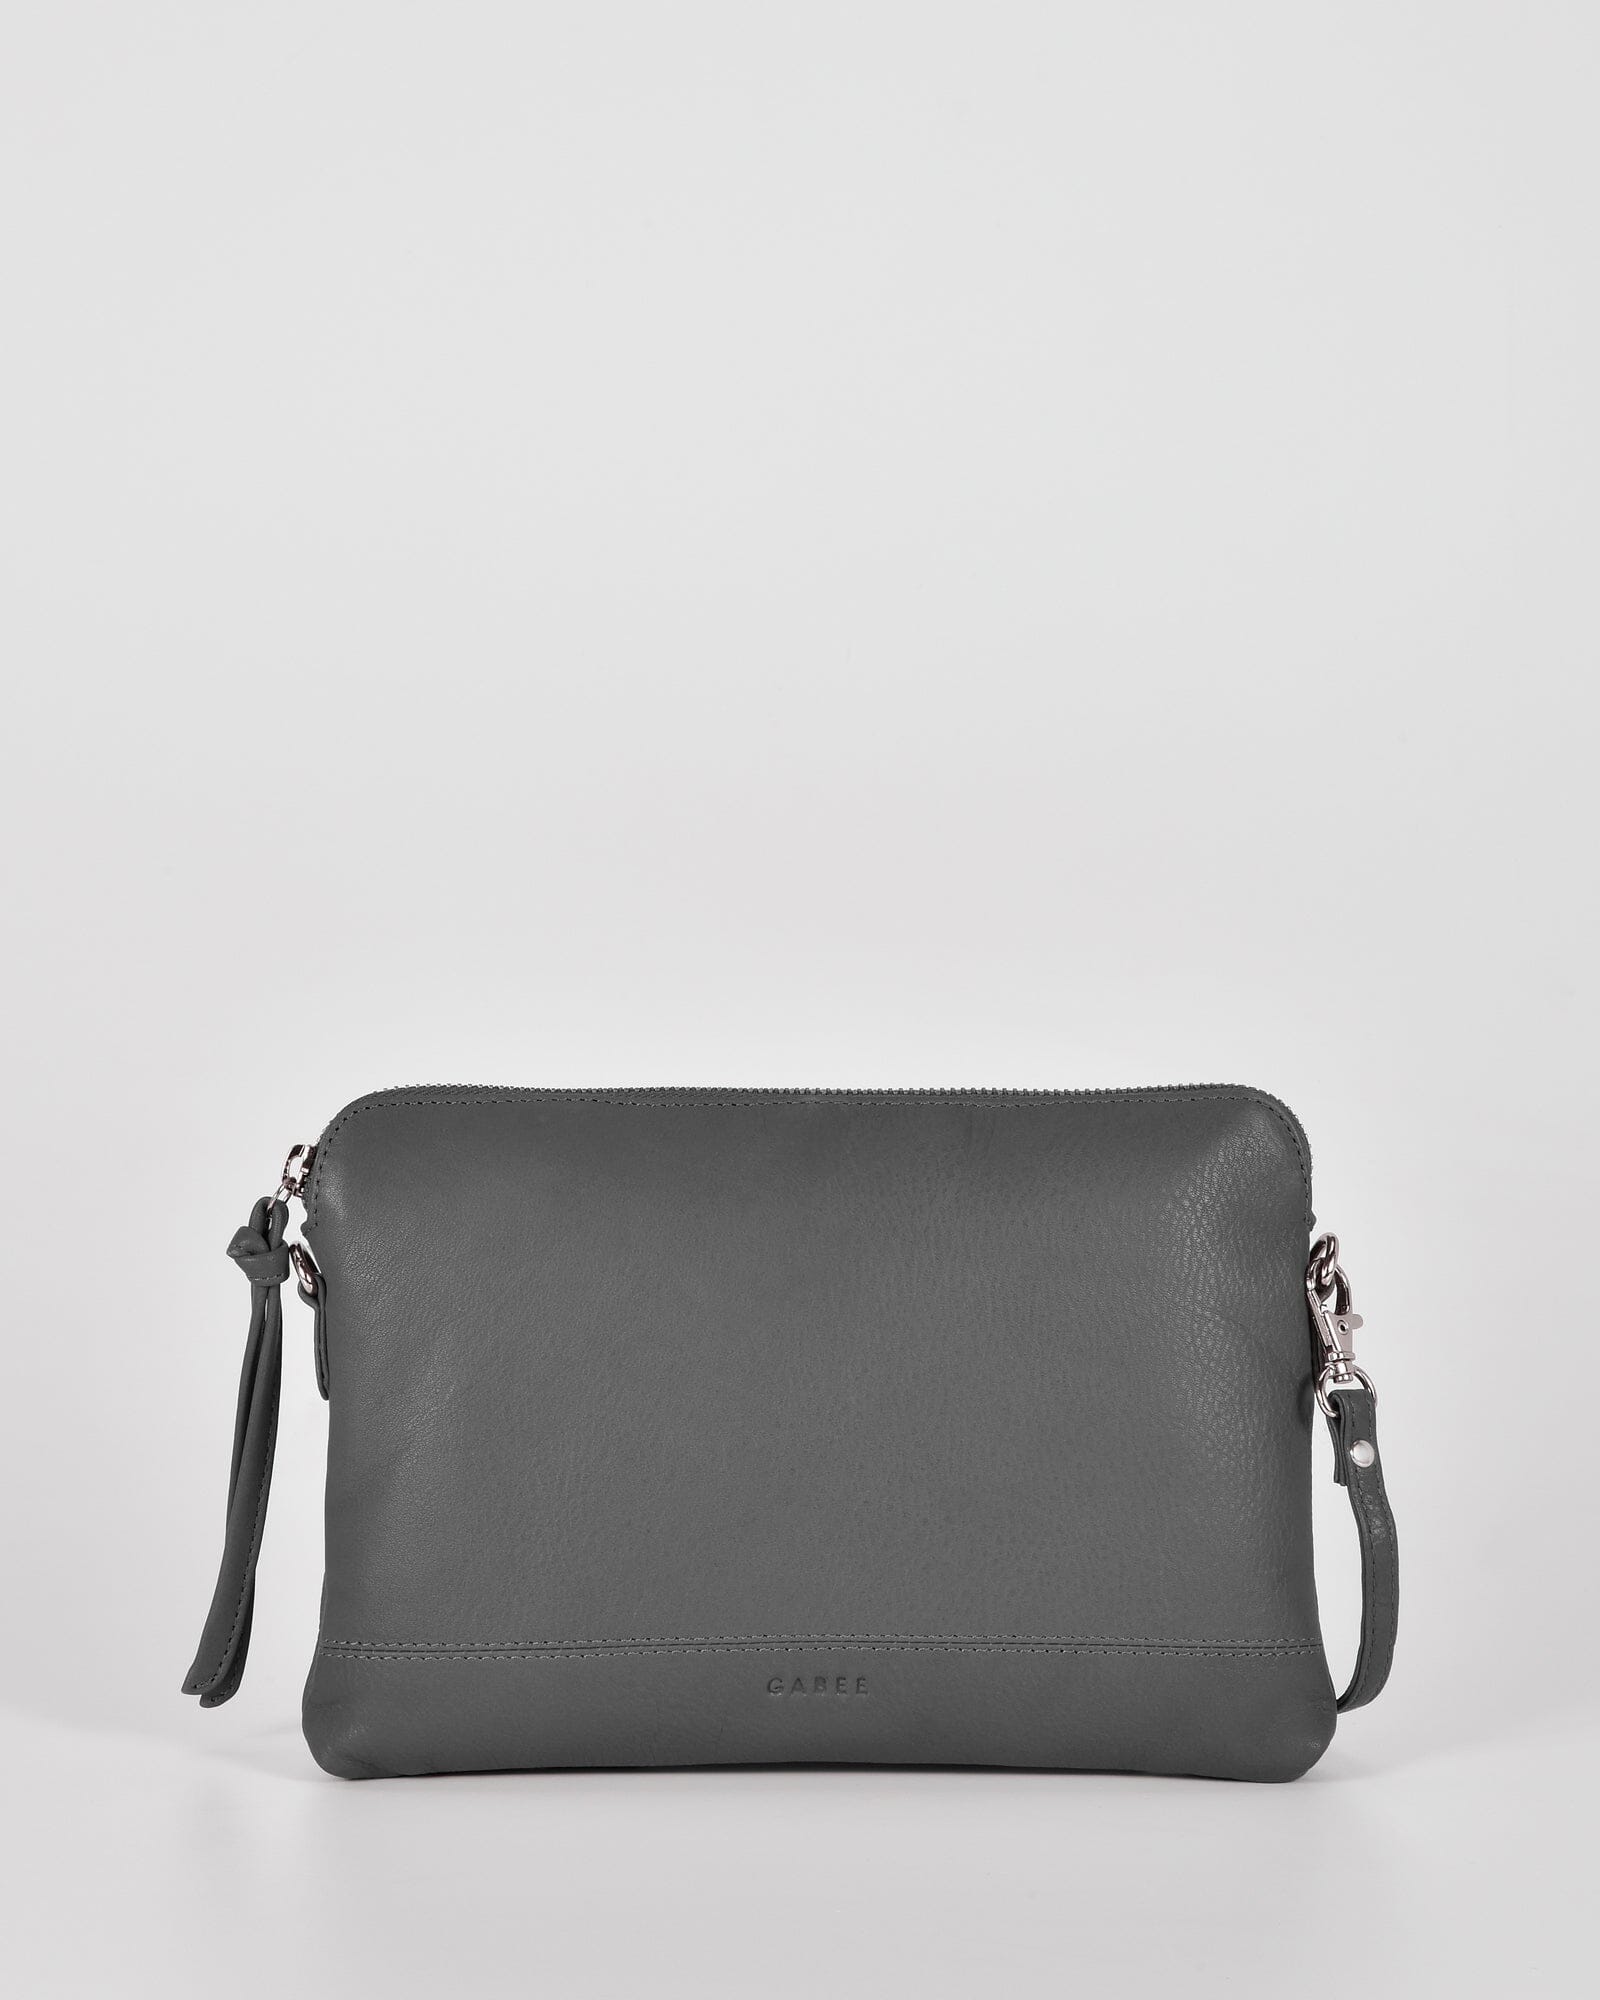 Kate Spade gray crossbody purse with white trim. Minor dirt. See pictures.  | Purses crossbody, Kate spade grey, Purses